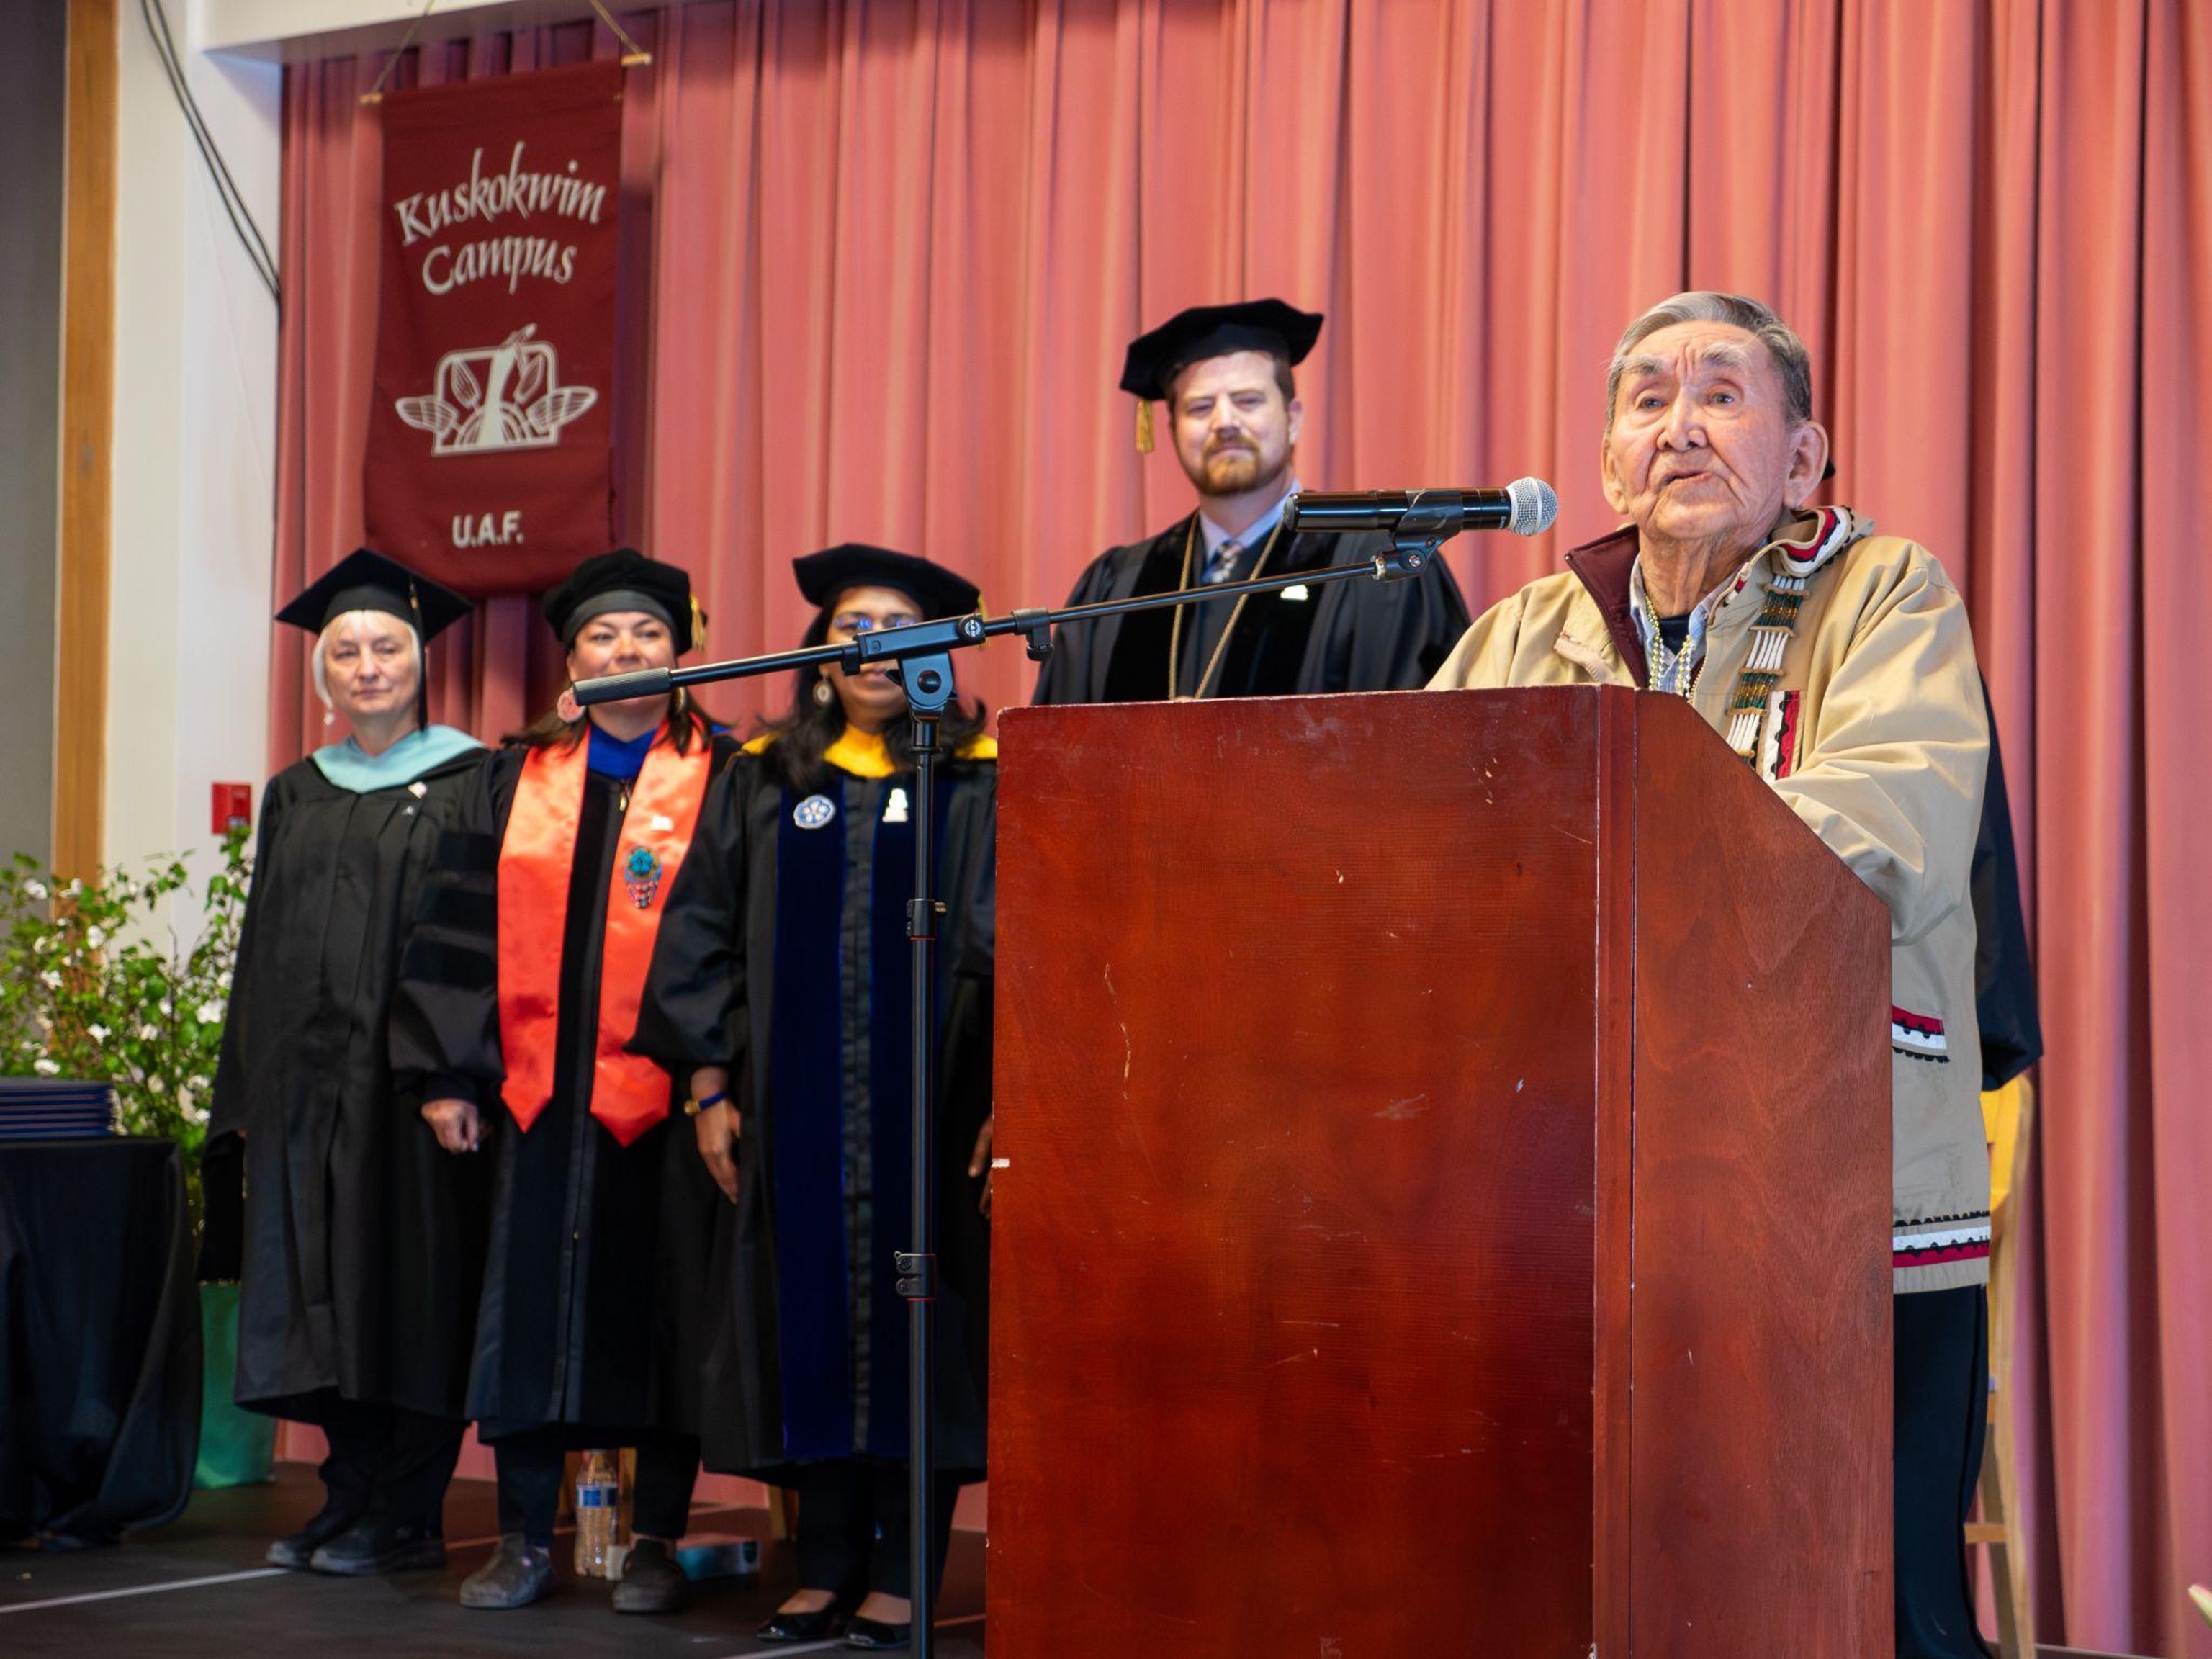 A man wearing a kuspuk speaking from a lectern on a stage. Four people in academic regalia stand behind and to his left, in front of a banner that reads, “Kuskokwim Campus UAF.”